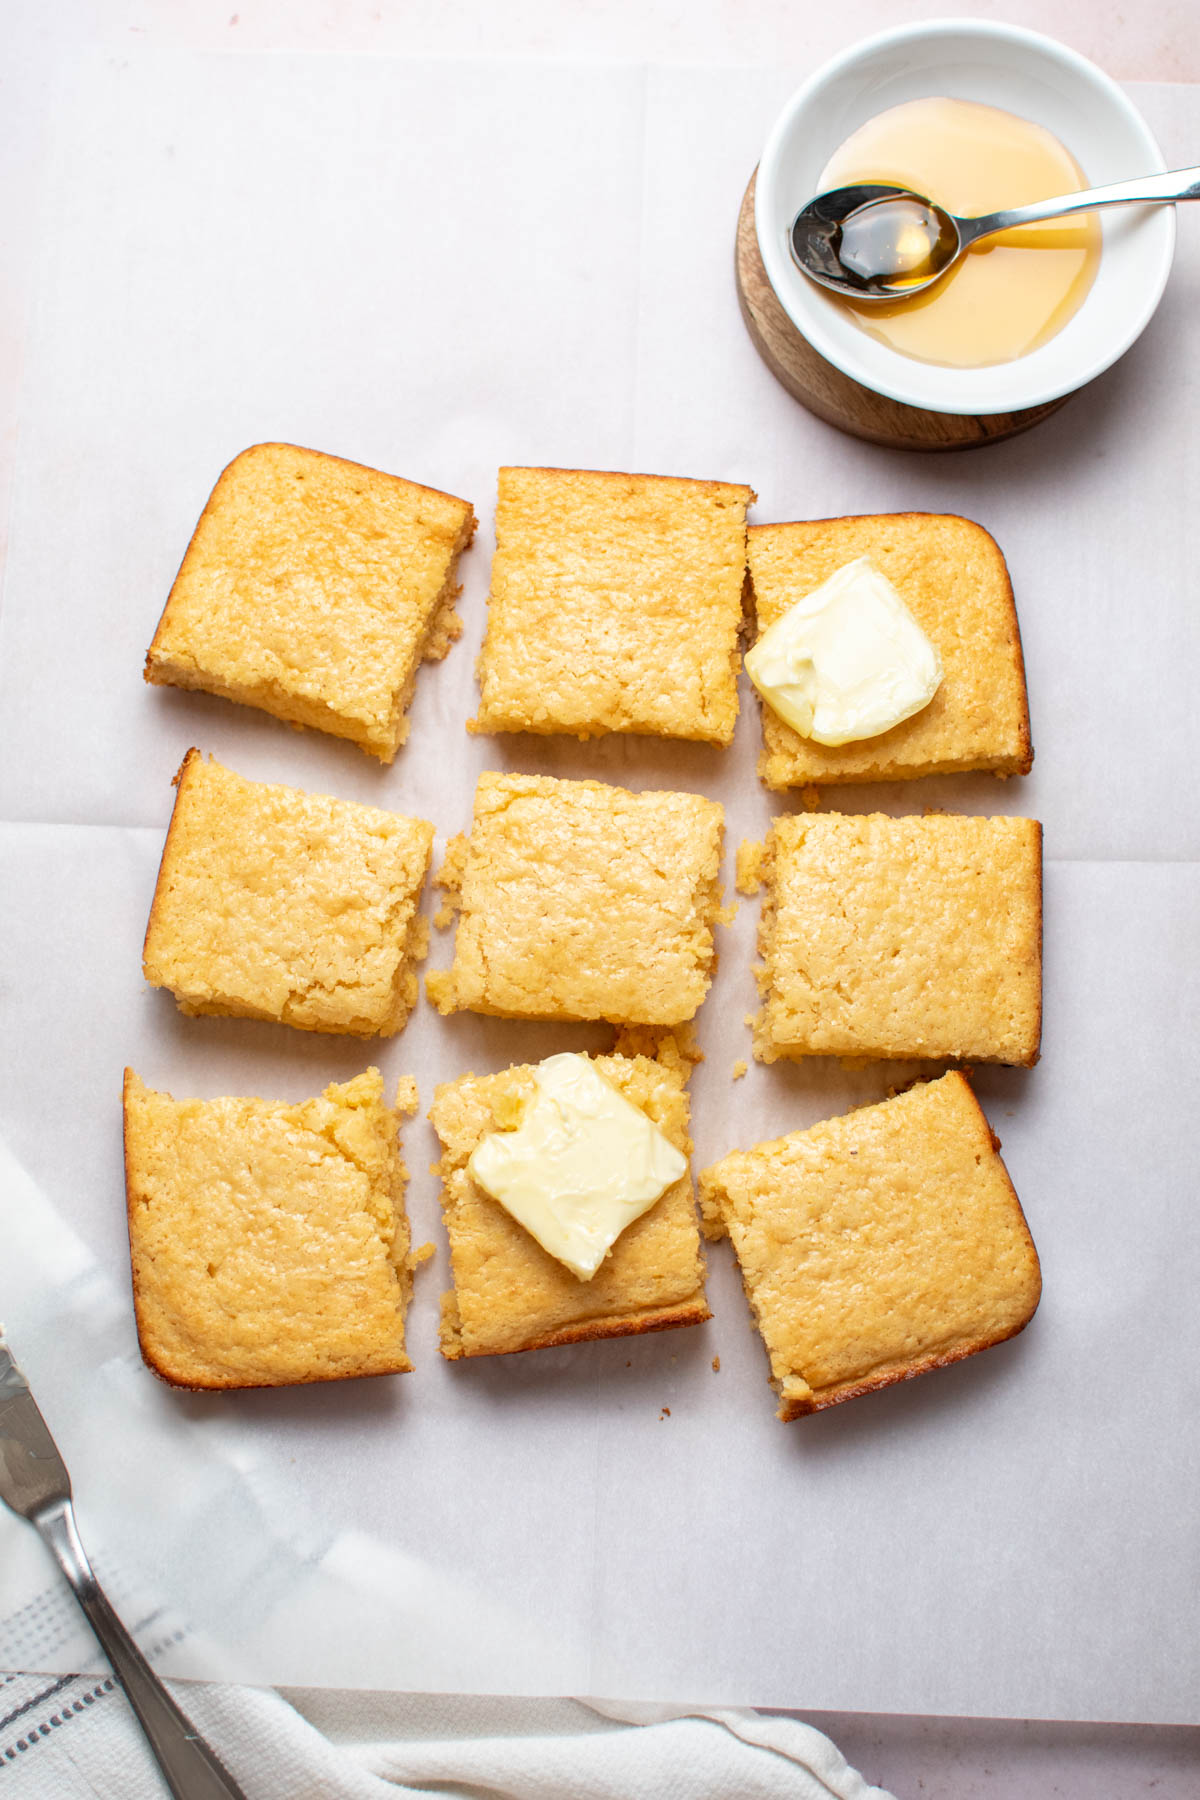 Nine pieces of cornbread arranged on parchment paper with pats of butter on 2 pieces.